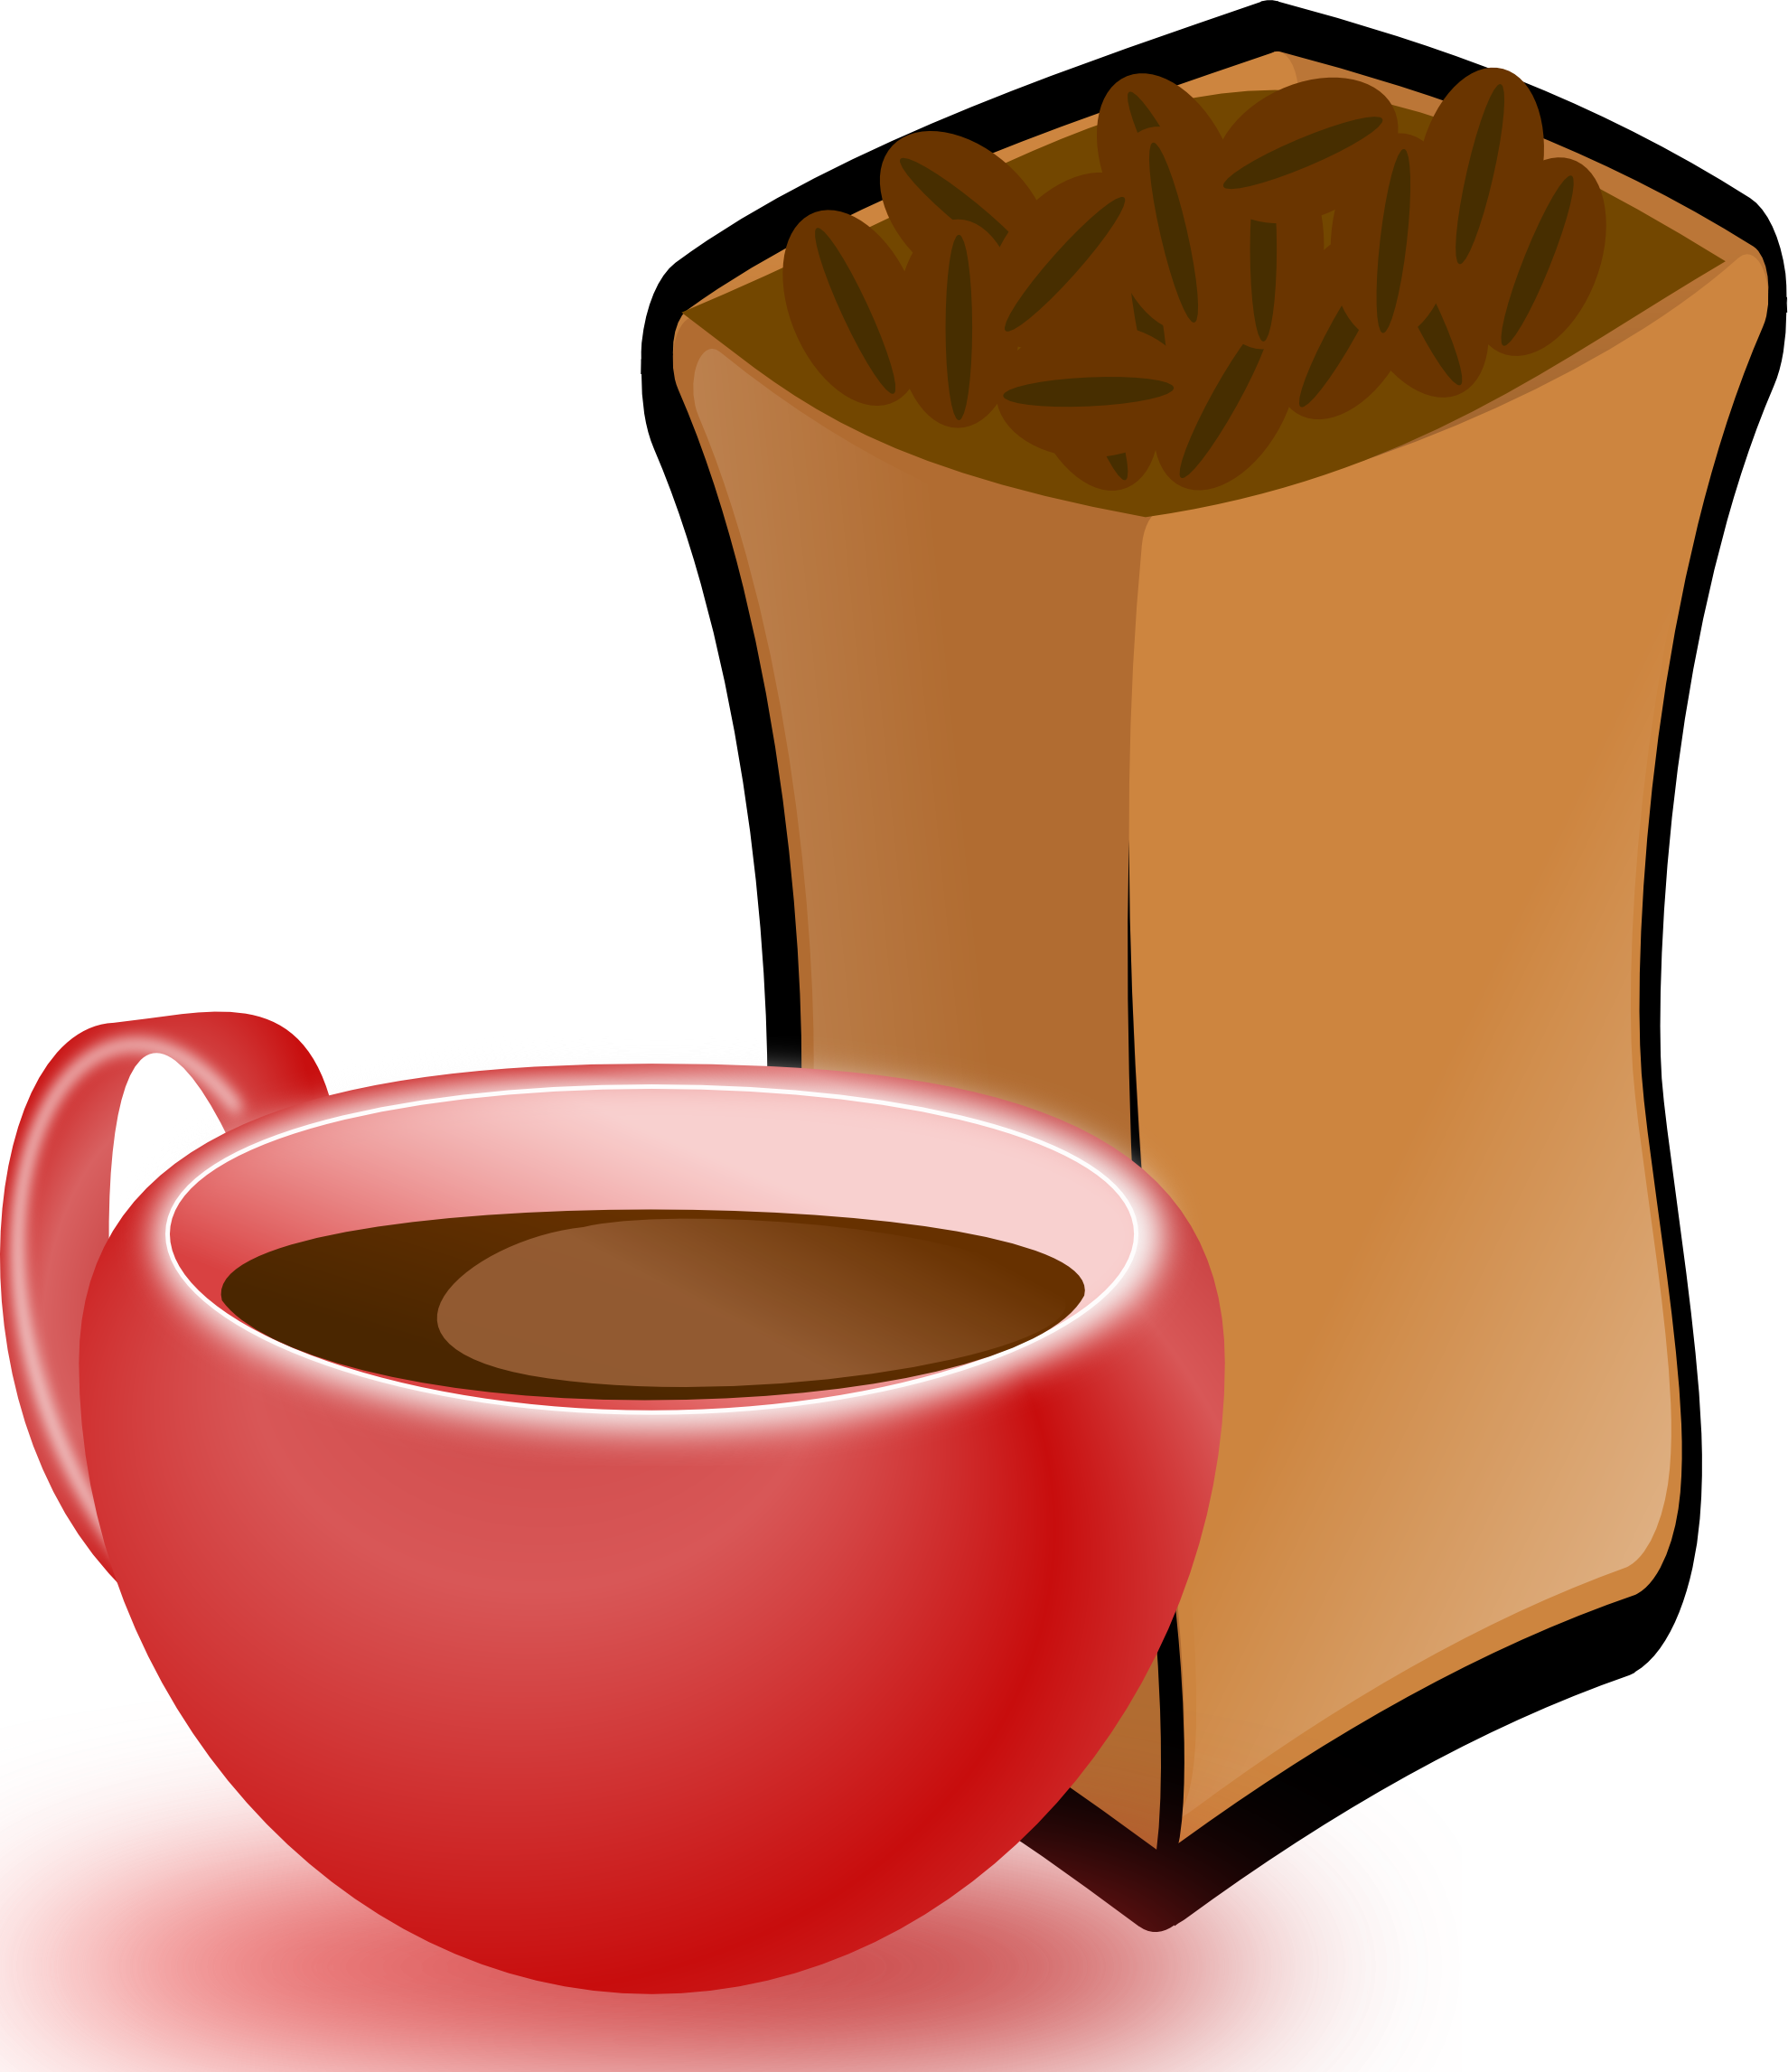 Cup Of Coffee With Sack Of Coffee Beans 4 555px - Coffee Beans Clip Art (1979x2293)